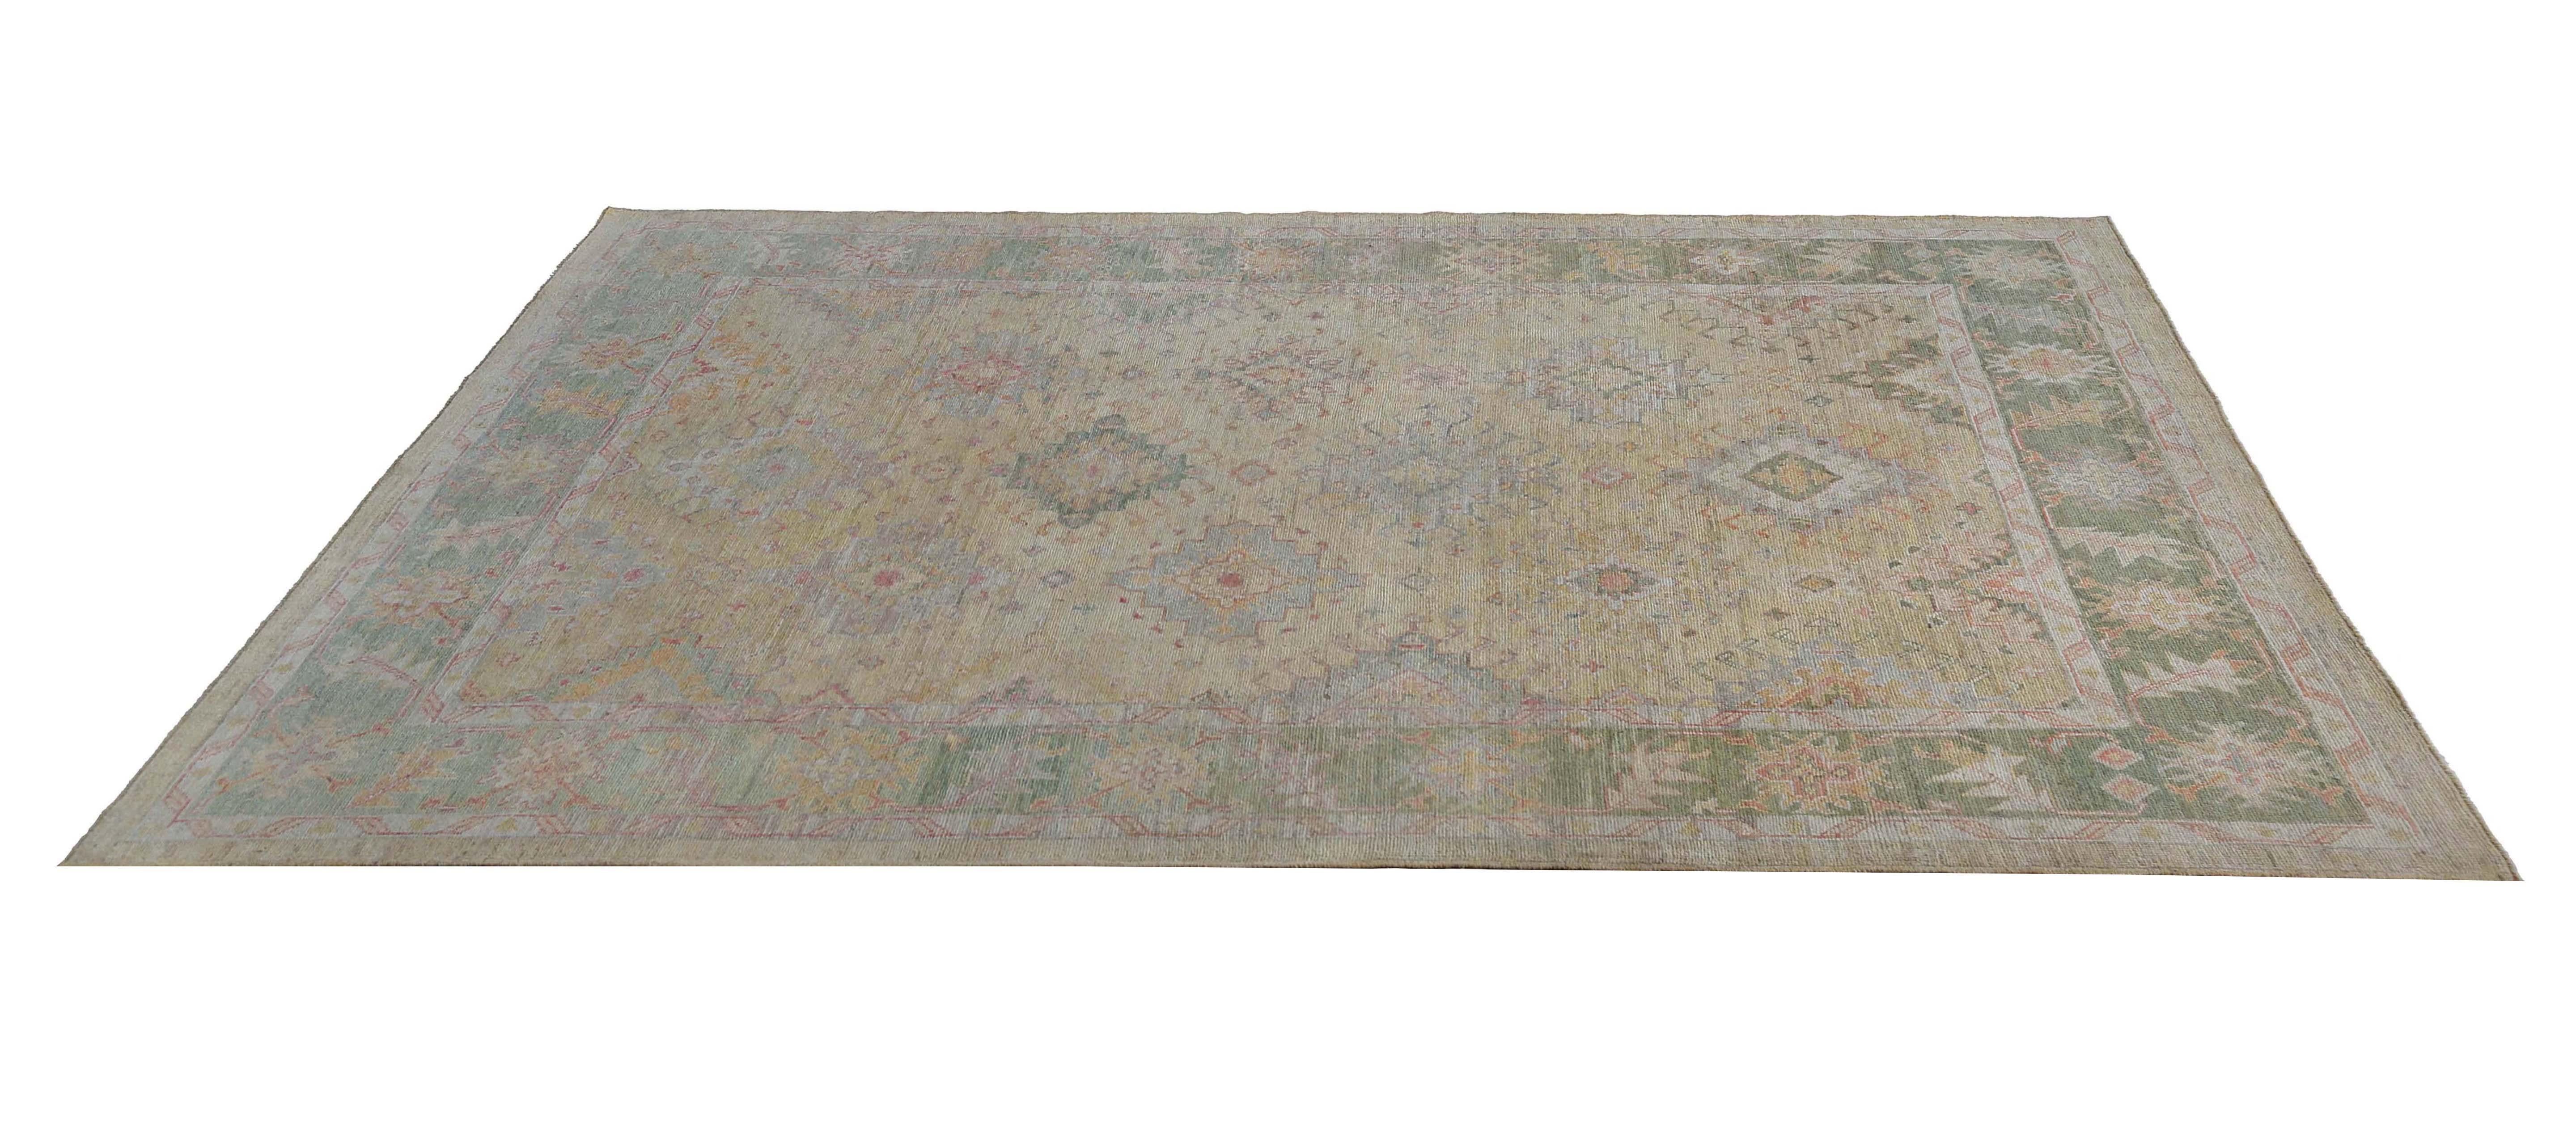 Experience the sheer luxury and timeless elegance of our Turkish Oushak rug, handcrafted to perfection and featuring a mesmerizing design that blends light color tones against a faded background. Measuring 10'2'' x 12'7'', this rug offers ample